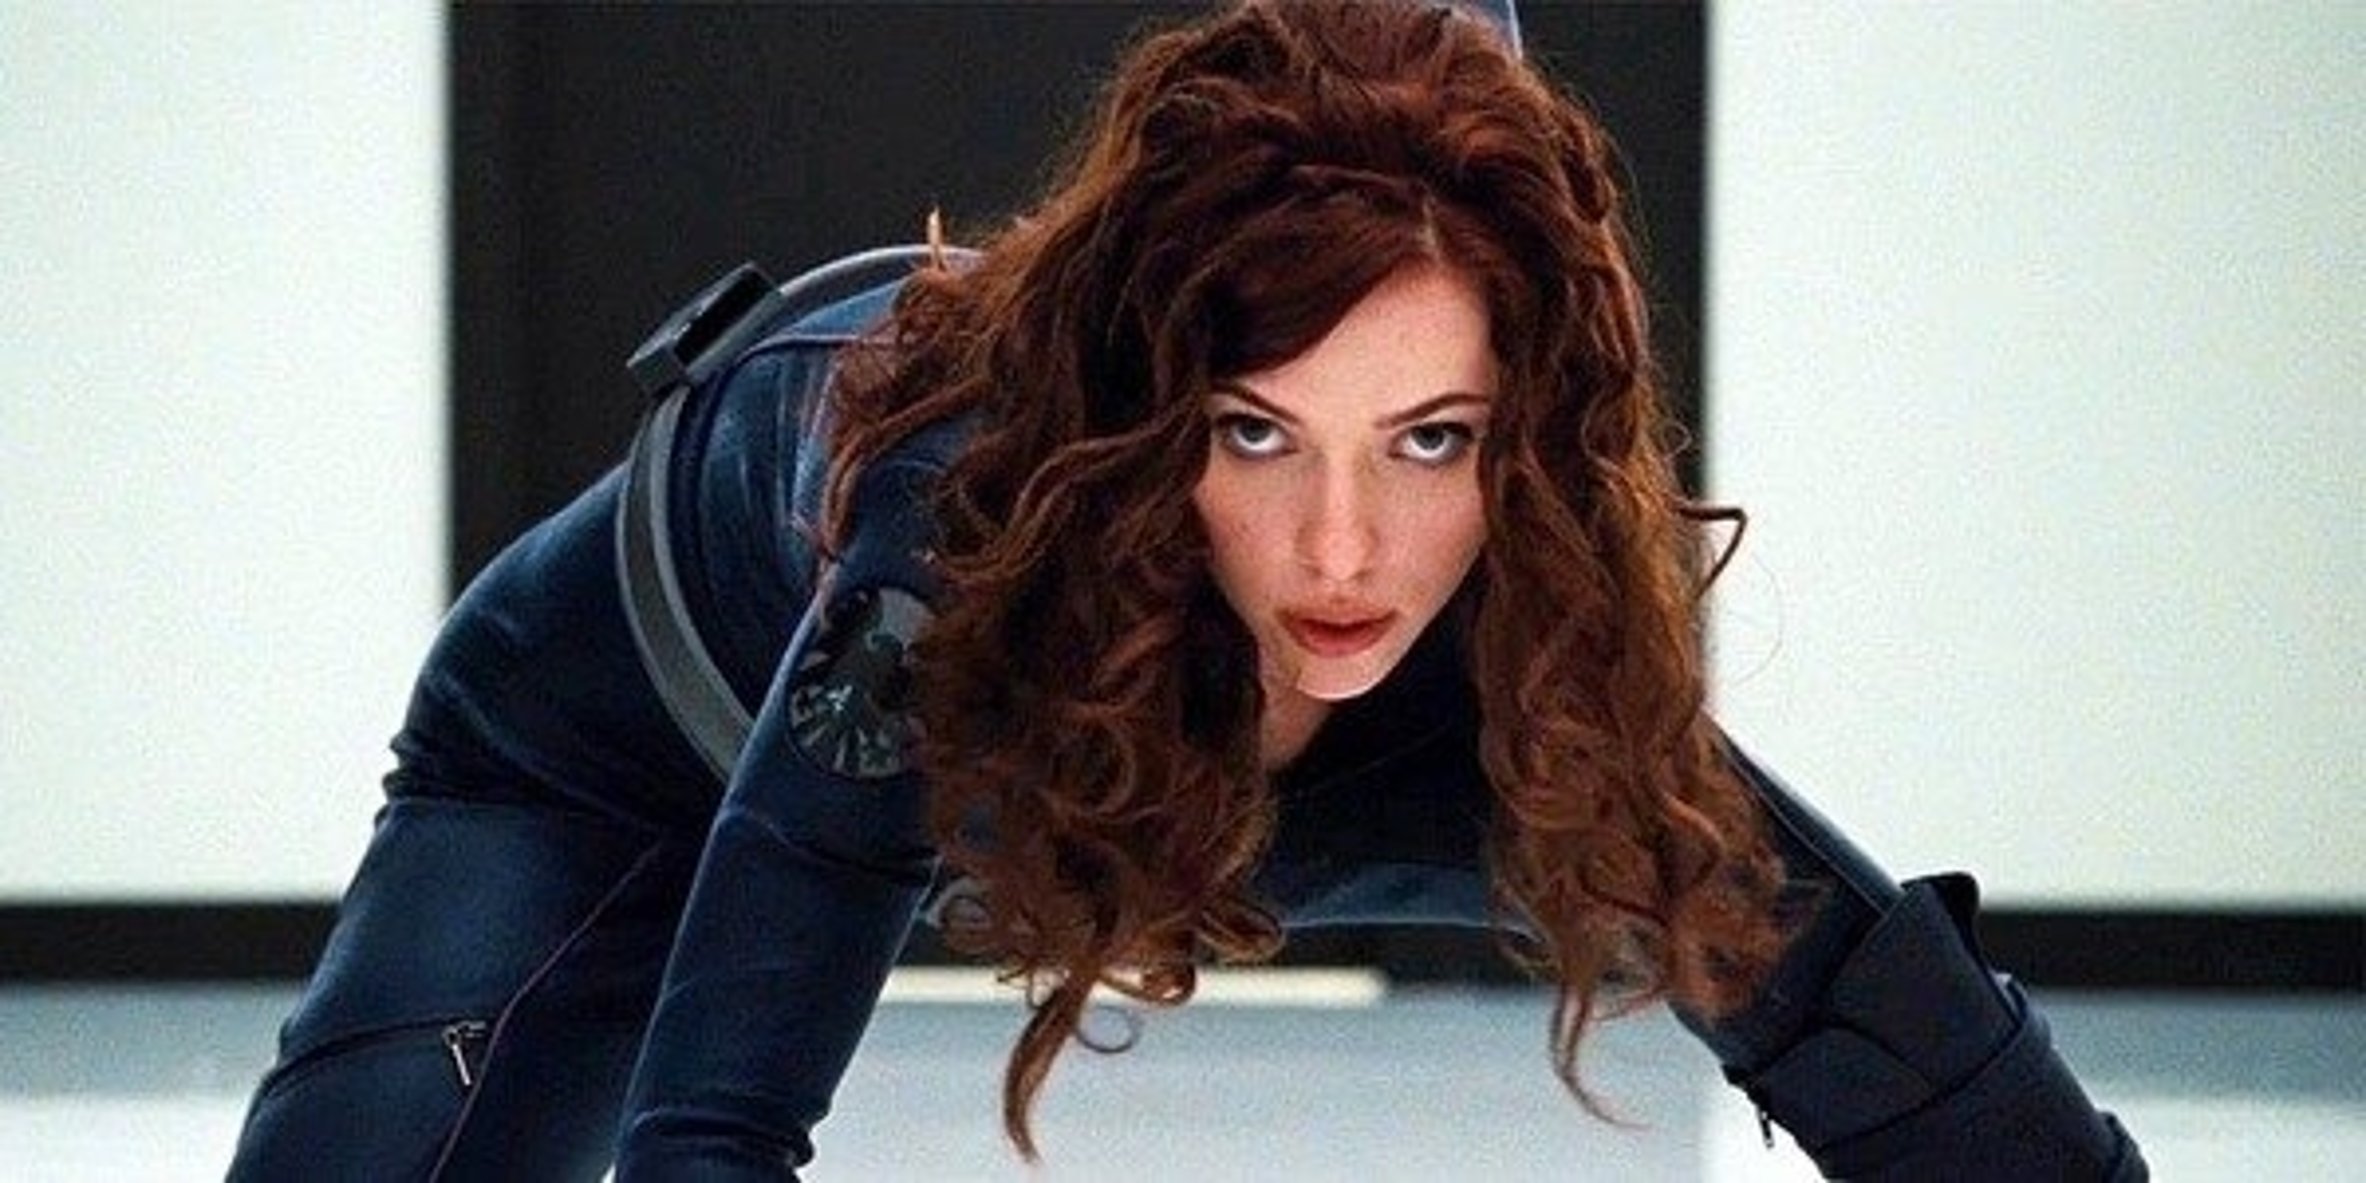 Black Widow Director Explains Why The Movie Needed To Poke Fun At Scarlett Johansson’s Famous Fighting Pose